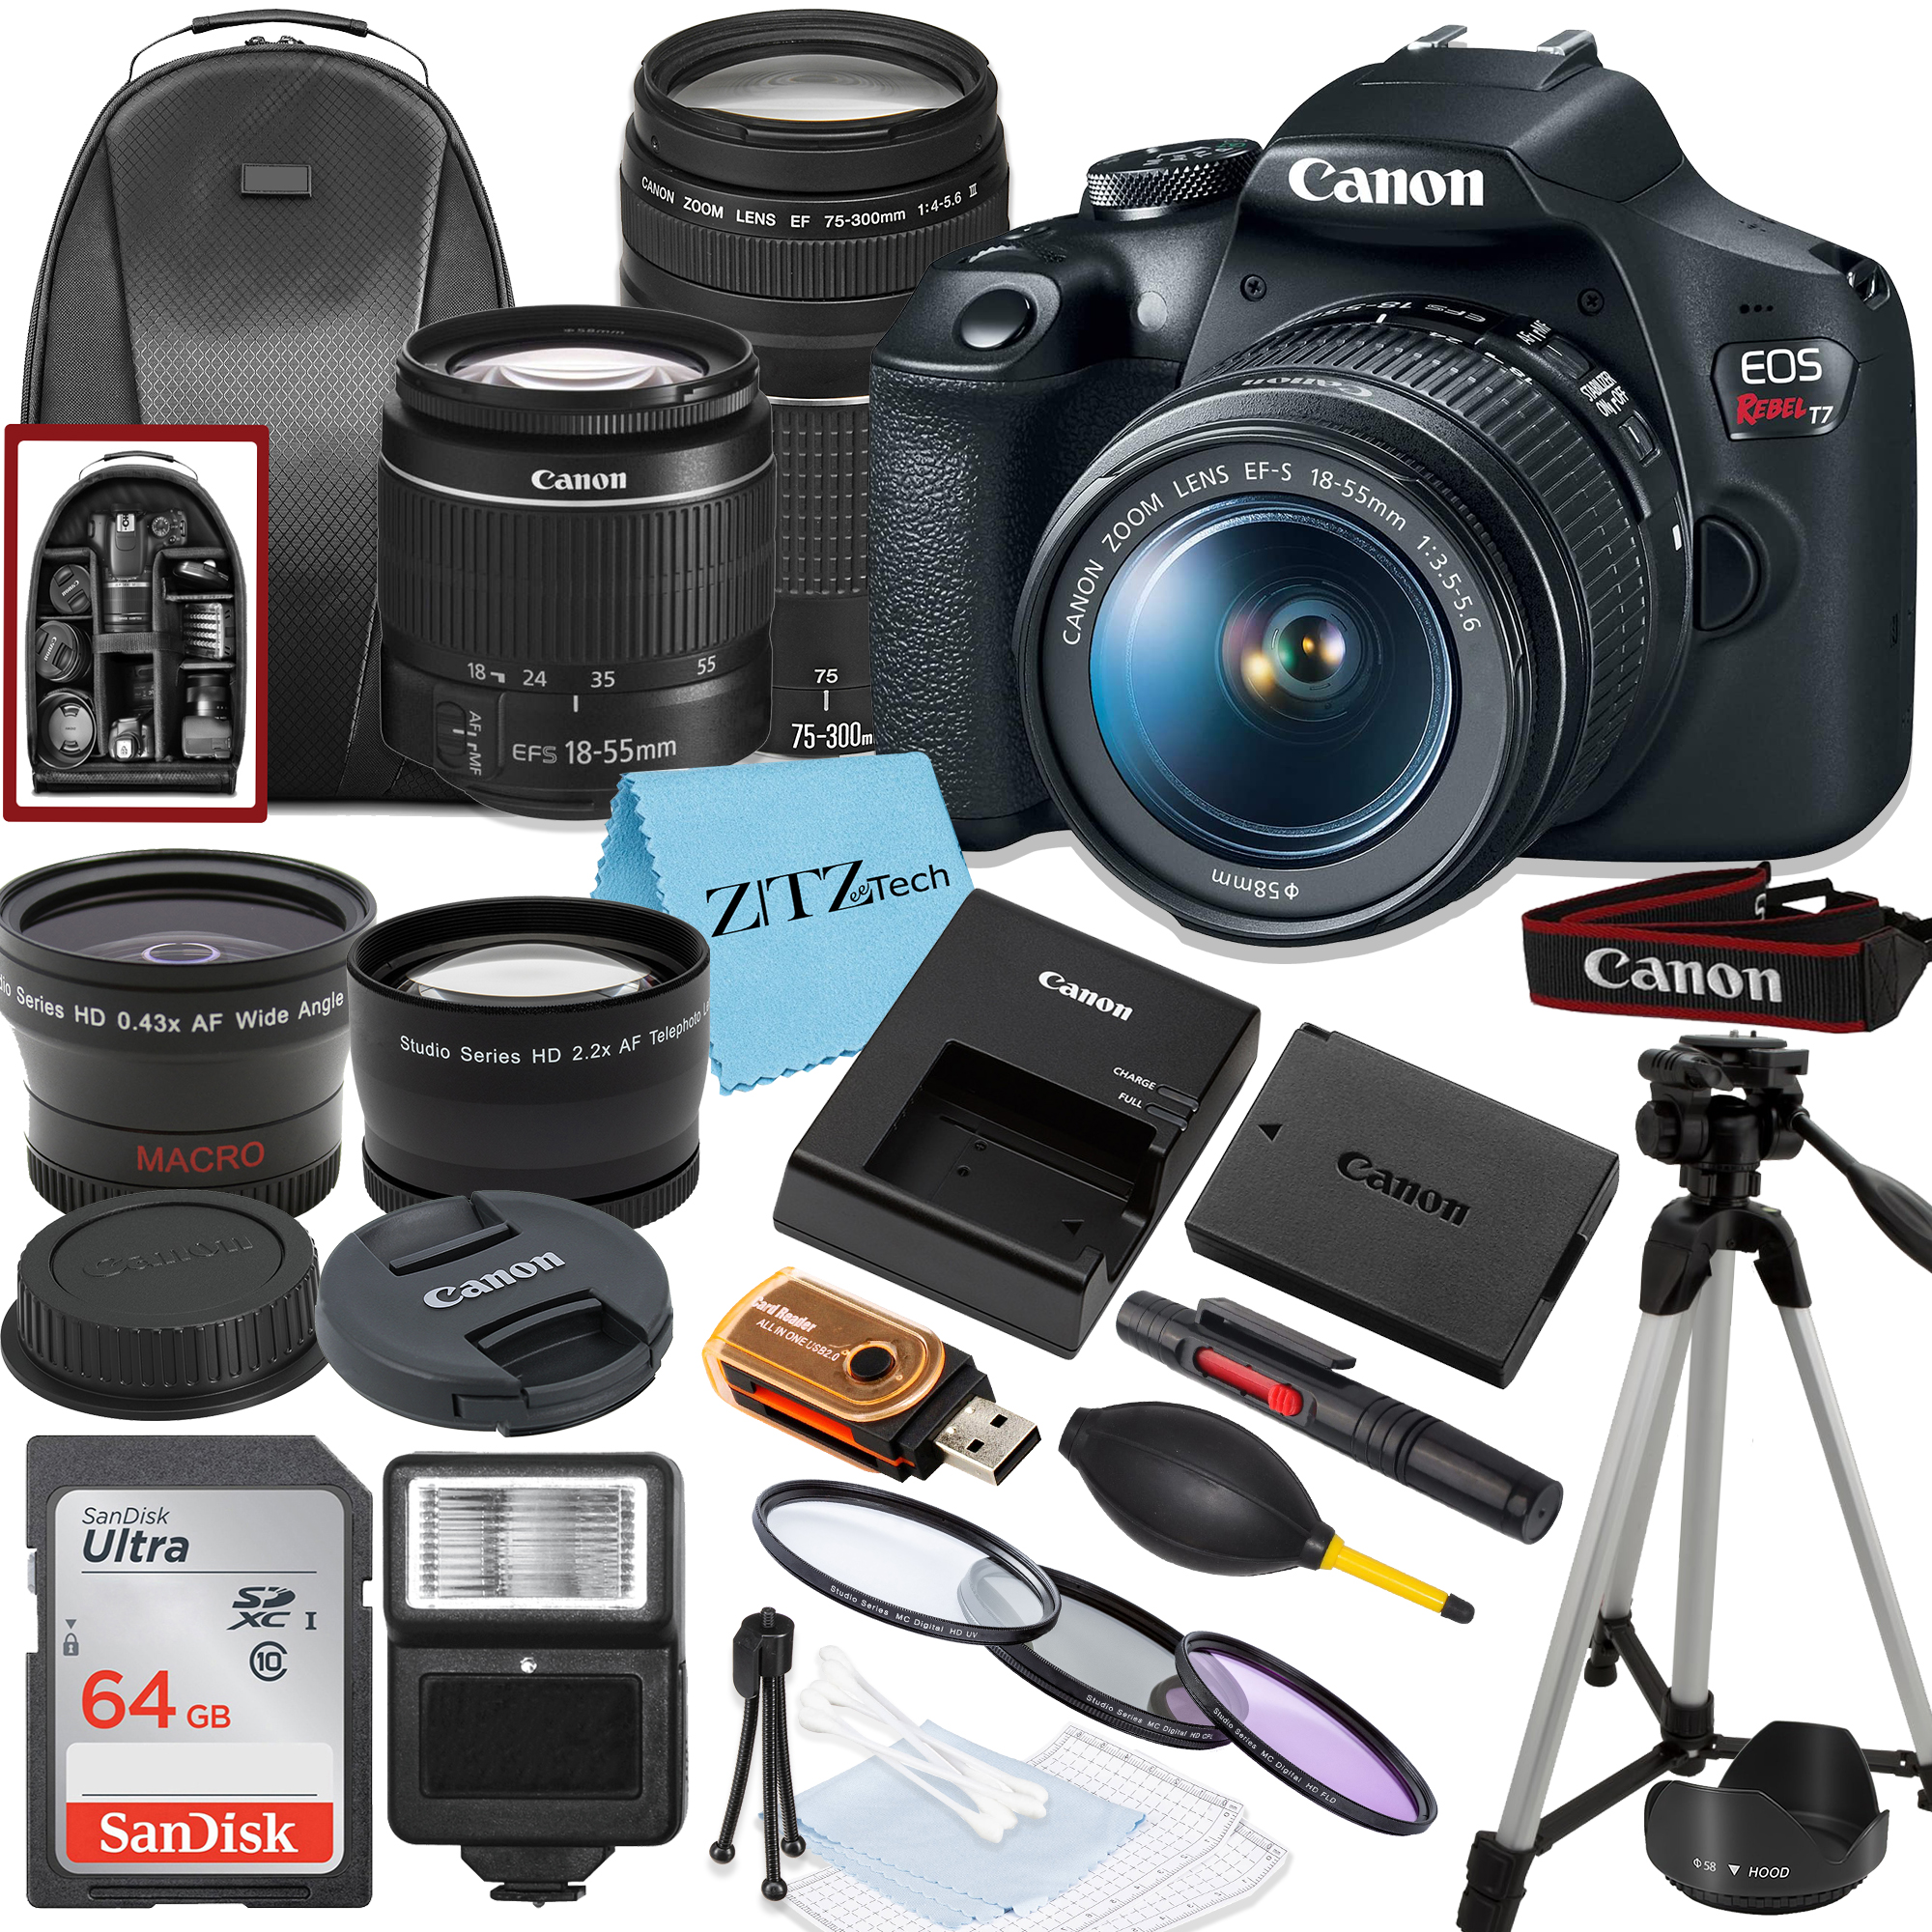 Canon EOS Rebel T7 Digital SLR Camera Bundle with 18-55mm, 75-300mm Lens, SanDisk 64GB Memory Card, Tripod, Flash, Deluxe Backpack and ZeeTech Accessory Bundle